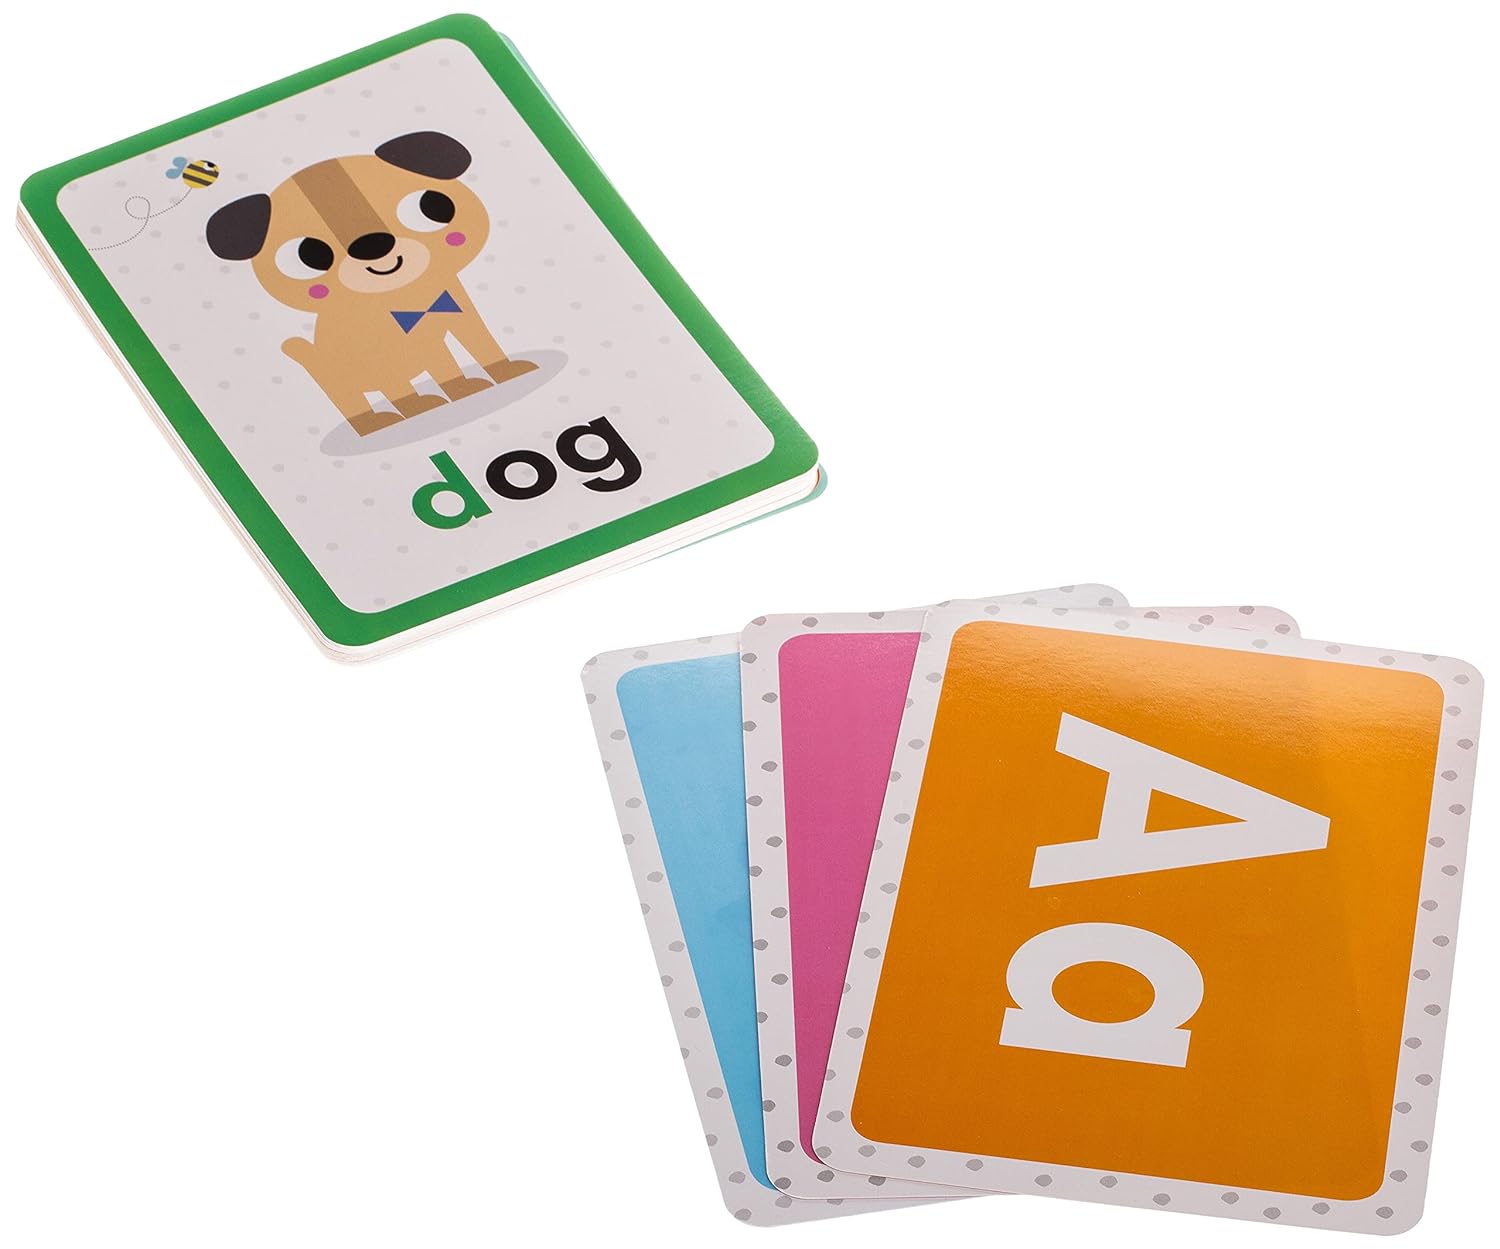 ABC Flashcards: Scholastic Early Learners (Flashcards) - The English Bookshop